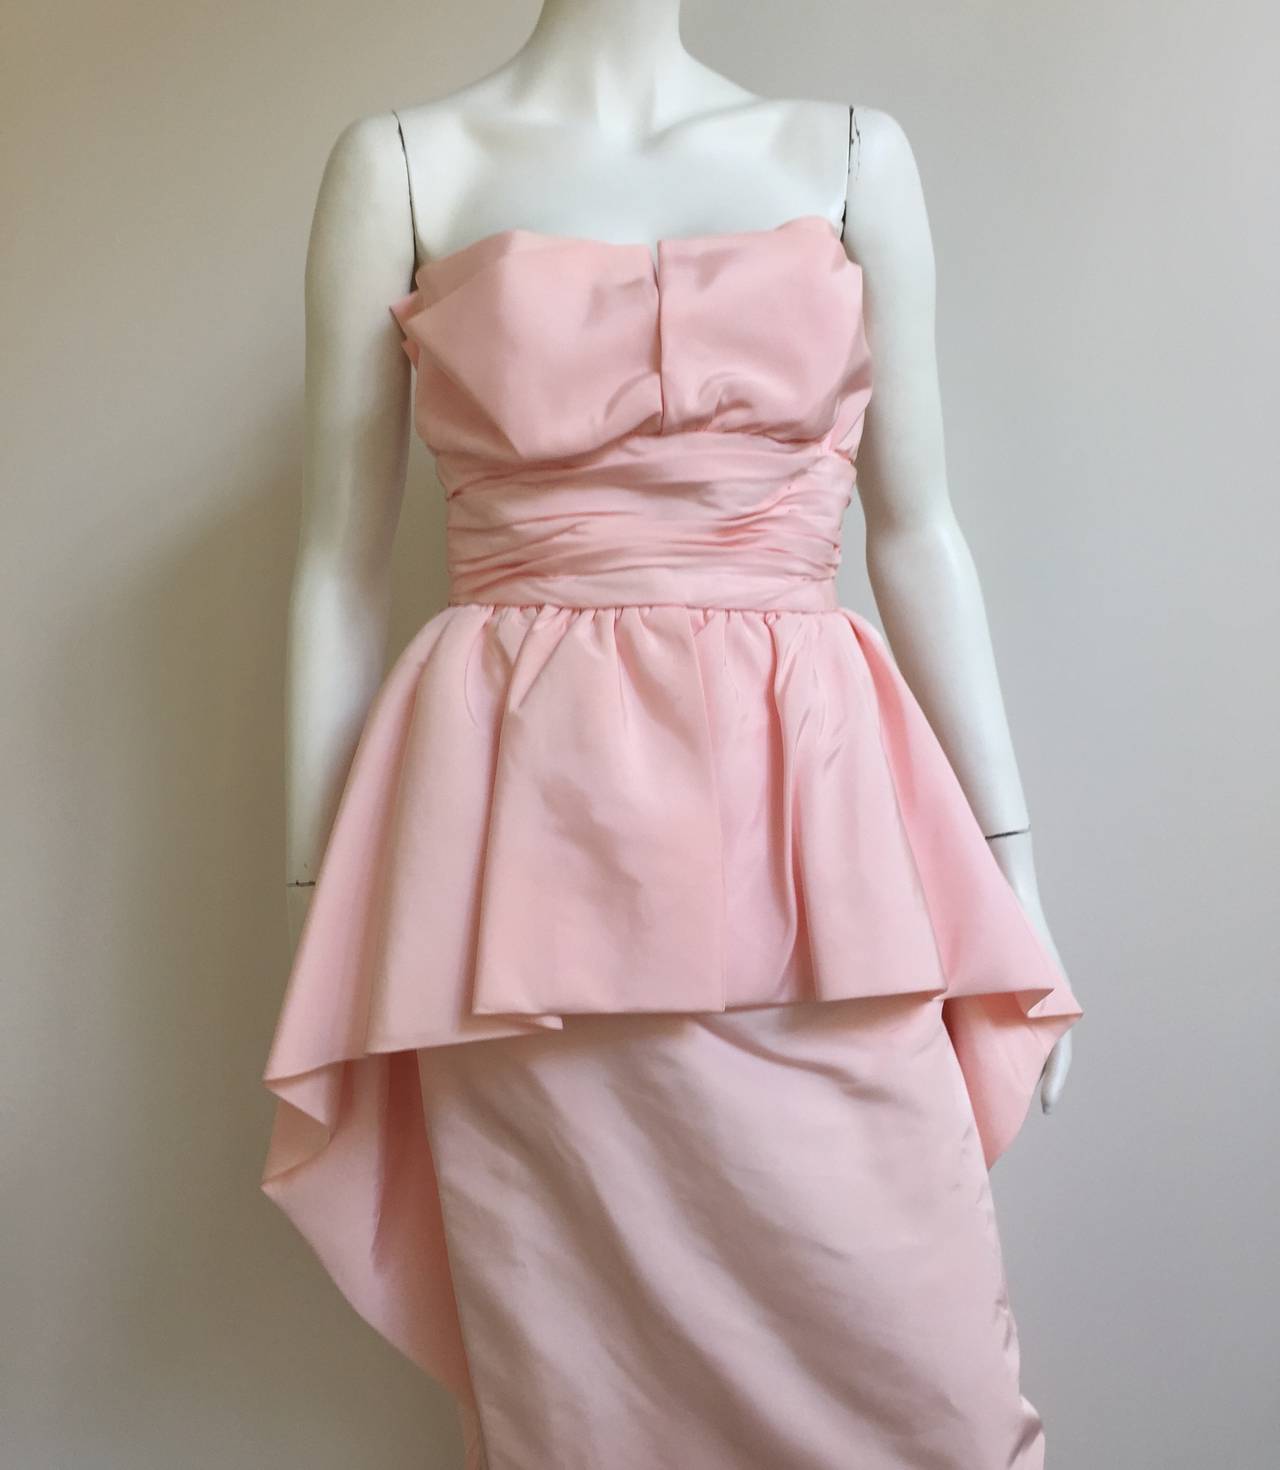 Victor Costa for Neiman Marcus 1980s pink strapless gown. Original size 10 but fits like a modern day size 6 but please see & use measurements. Ladies please use your measuring tape to measure your lovely body so you know for certain this will fit